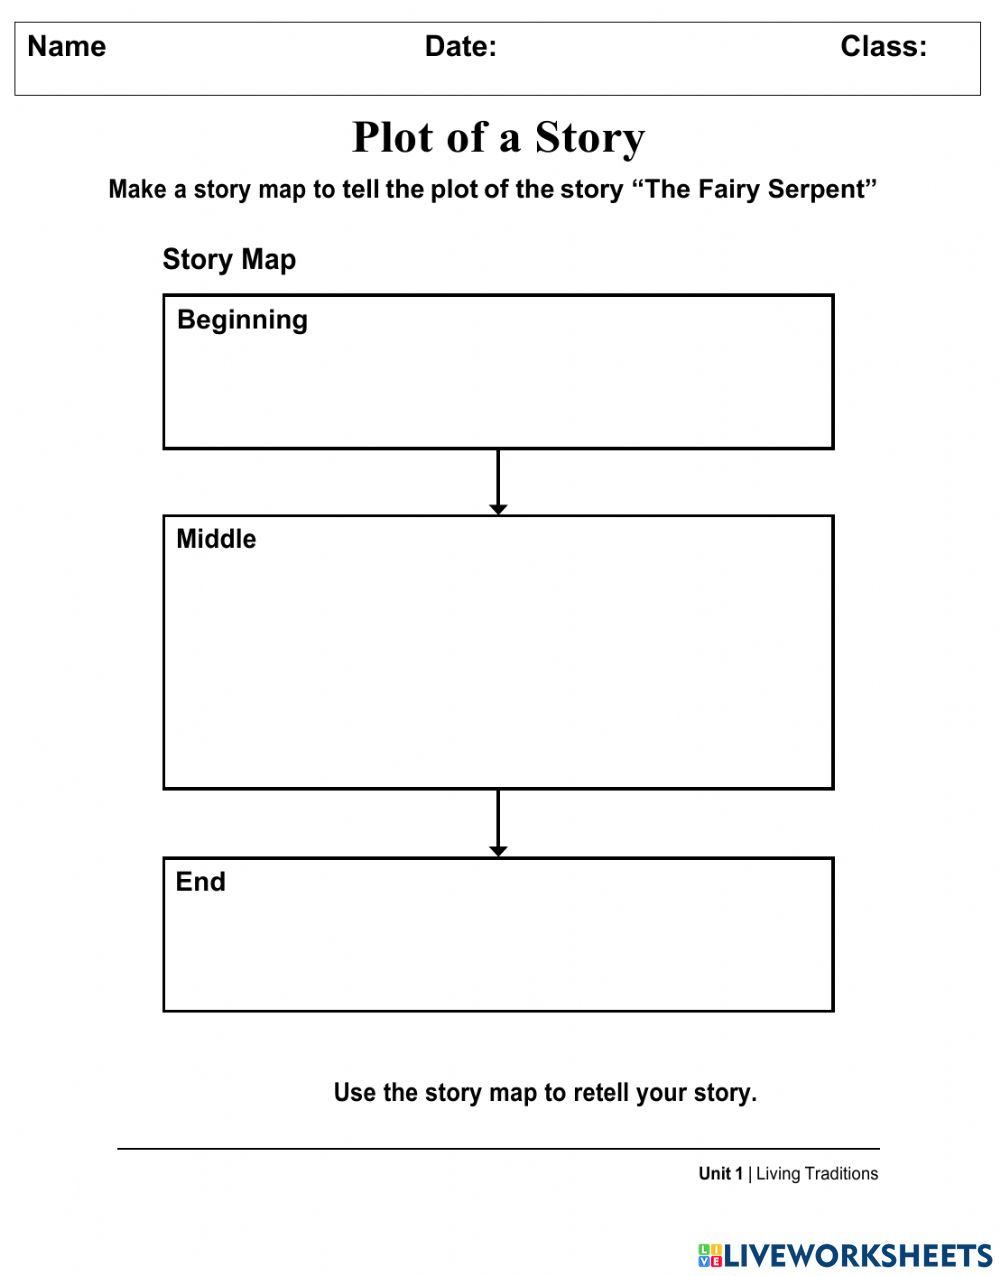 Story Map- The Fairy Serpent